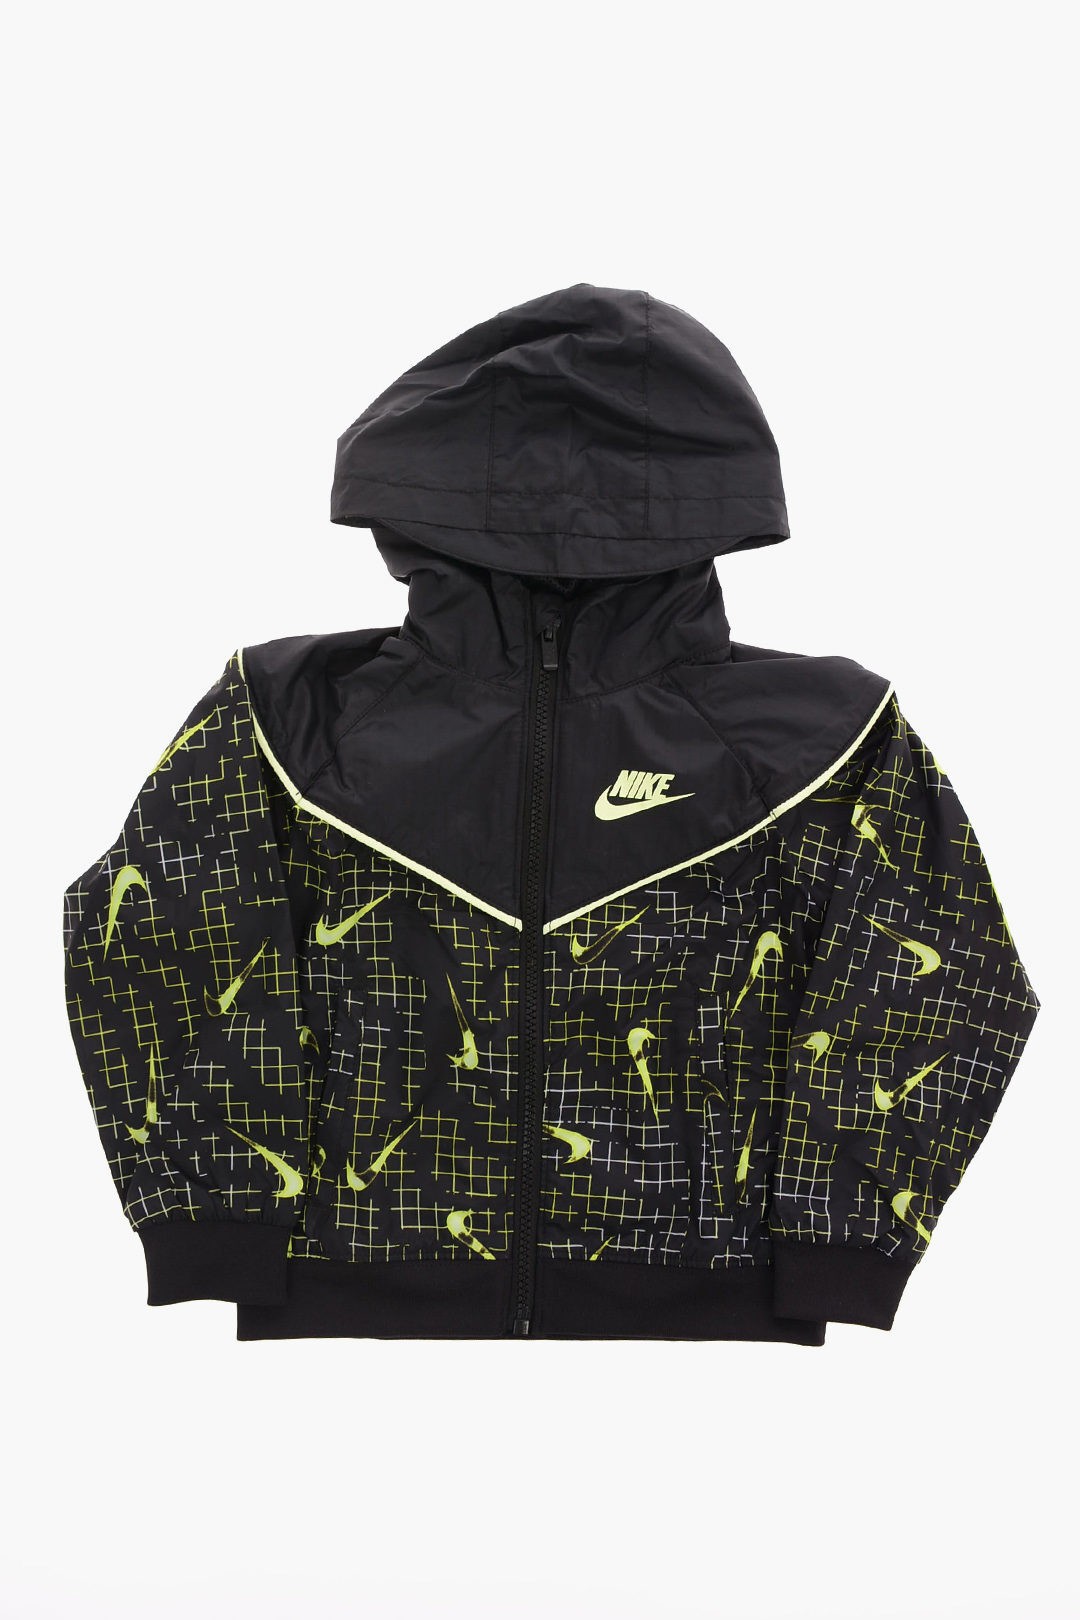 NIKE KIDS ナイキ ジャケット 86H529 023 ボーイズ ALL OVER LOGO-PRINT HOODED JACKET GLOW IN THE DA..